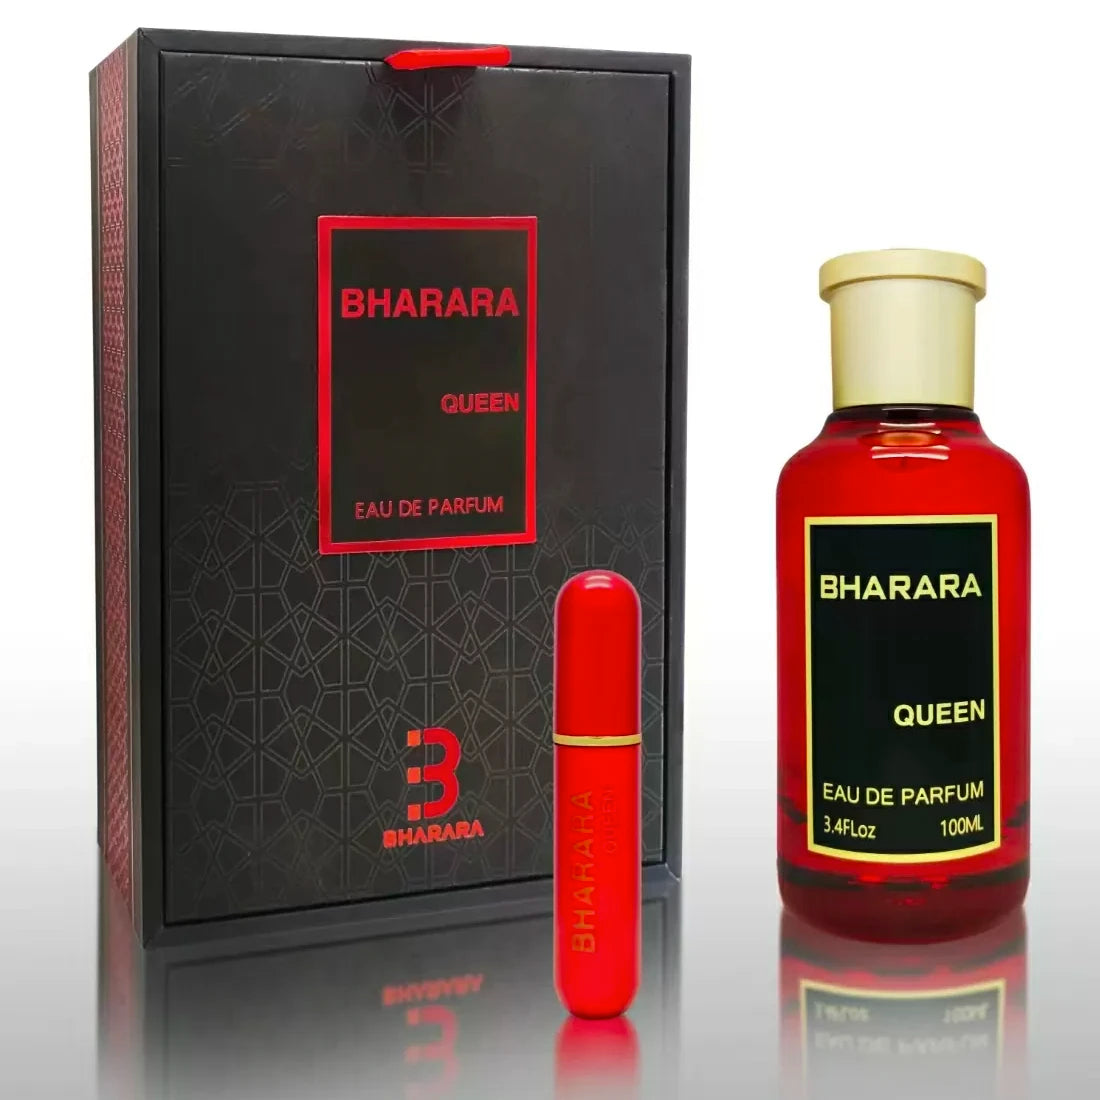 <p>Experience the captivating aura of "Bharara Queen" – a harmonious blend of citrus, florals, and warm undertones. Opening with refreshing notes of bergamot and lemon, this fragrance exudes elegance and femininity with delicate rose accords. Deliciously indulgent layers of caramel and vanilla are complemented by rich, sensual notes of amber and sandalwood. Truly fit for royalty, this scent exudes confidence, grace, and allure.</p>